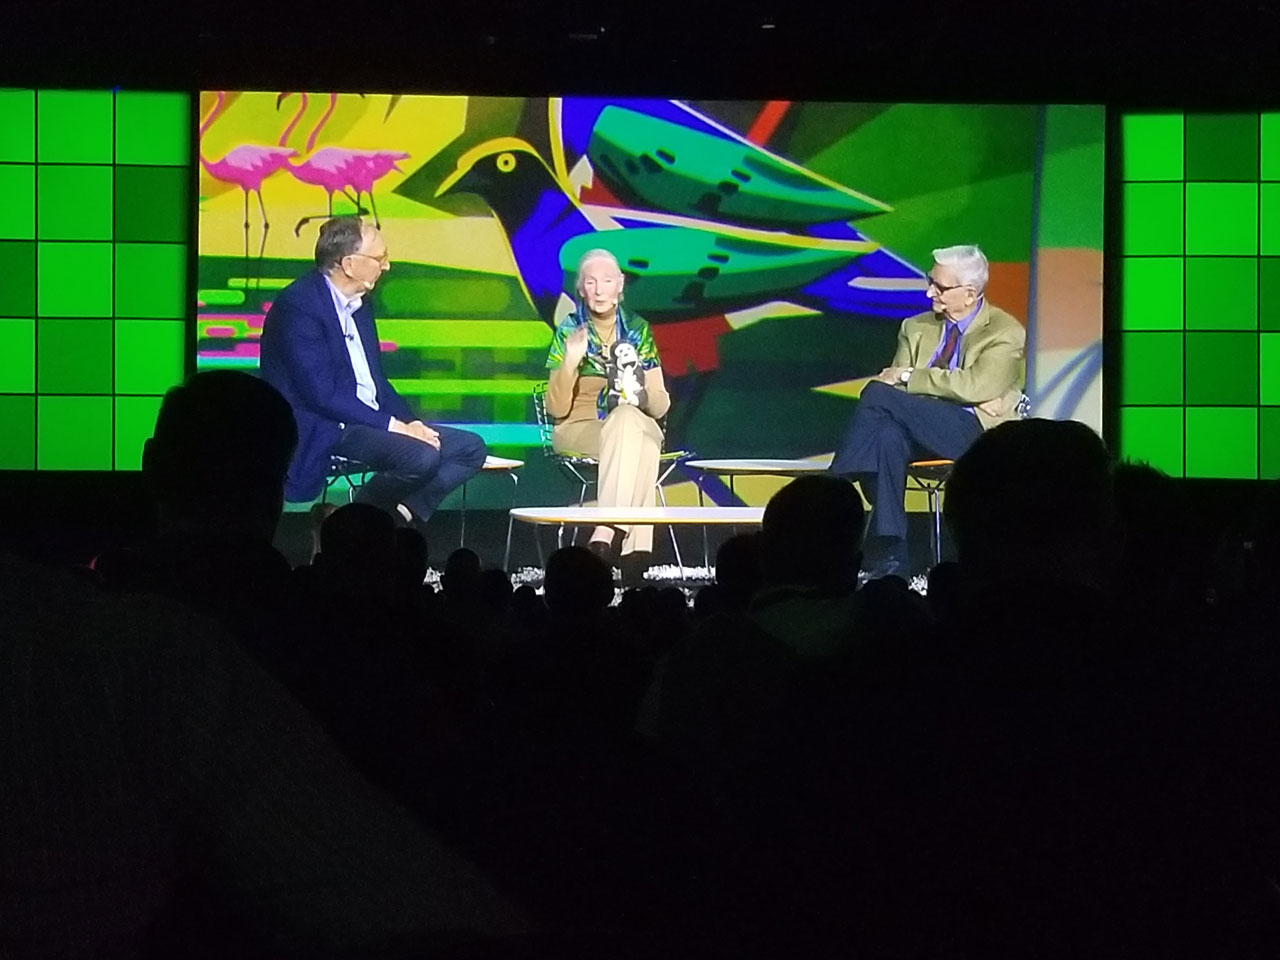 Jack Dangermond, Jane Goodall, and E.O. Wilson have a conversation on the Plenary stage